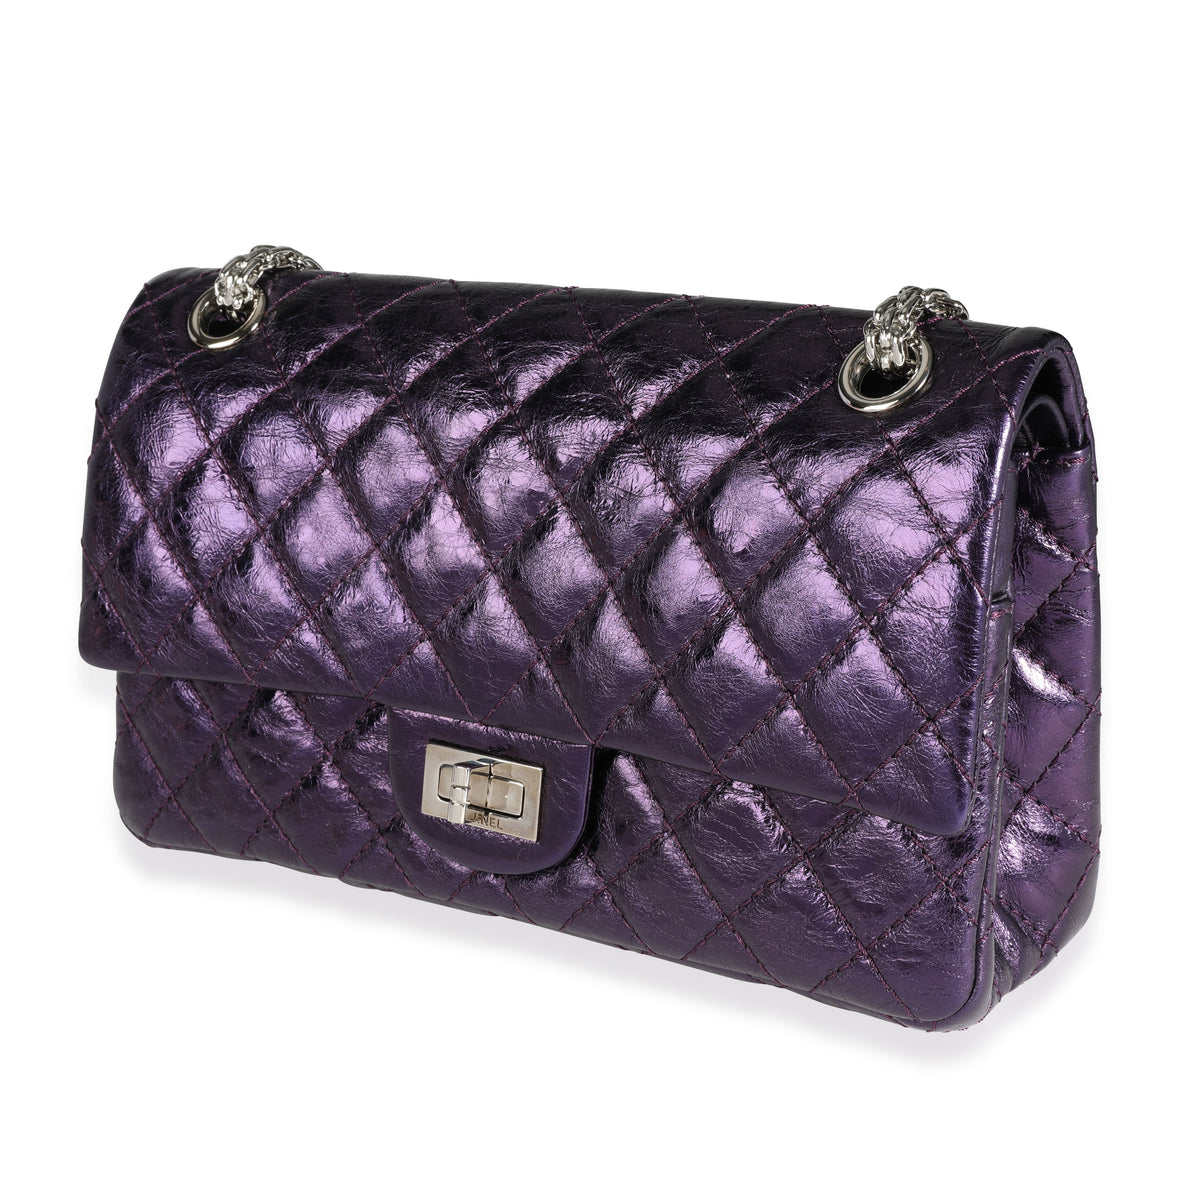 Chanel Metallic Pink Quilted Aged Calfskin Reissue 2.55 225 Double Flap Bag  Rare